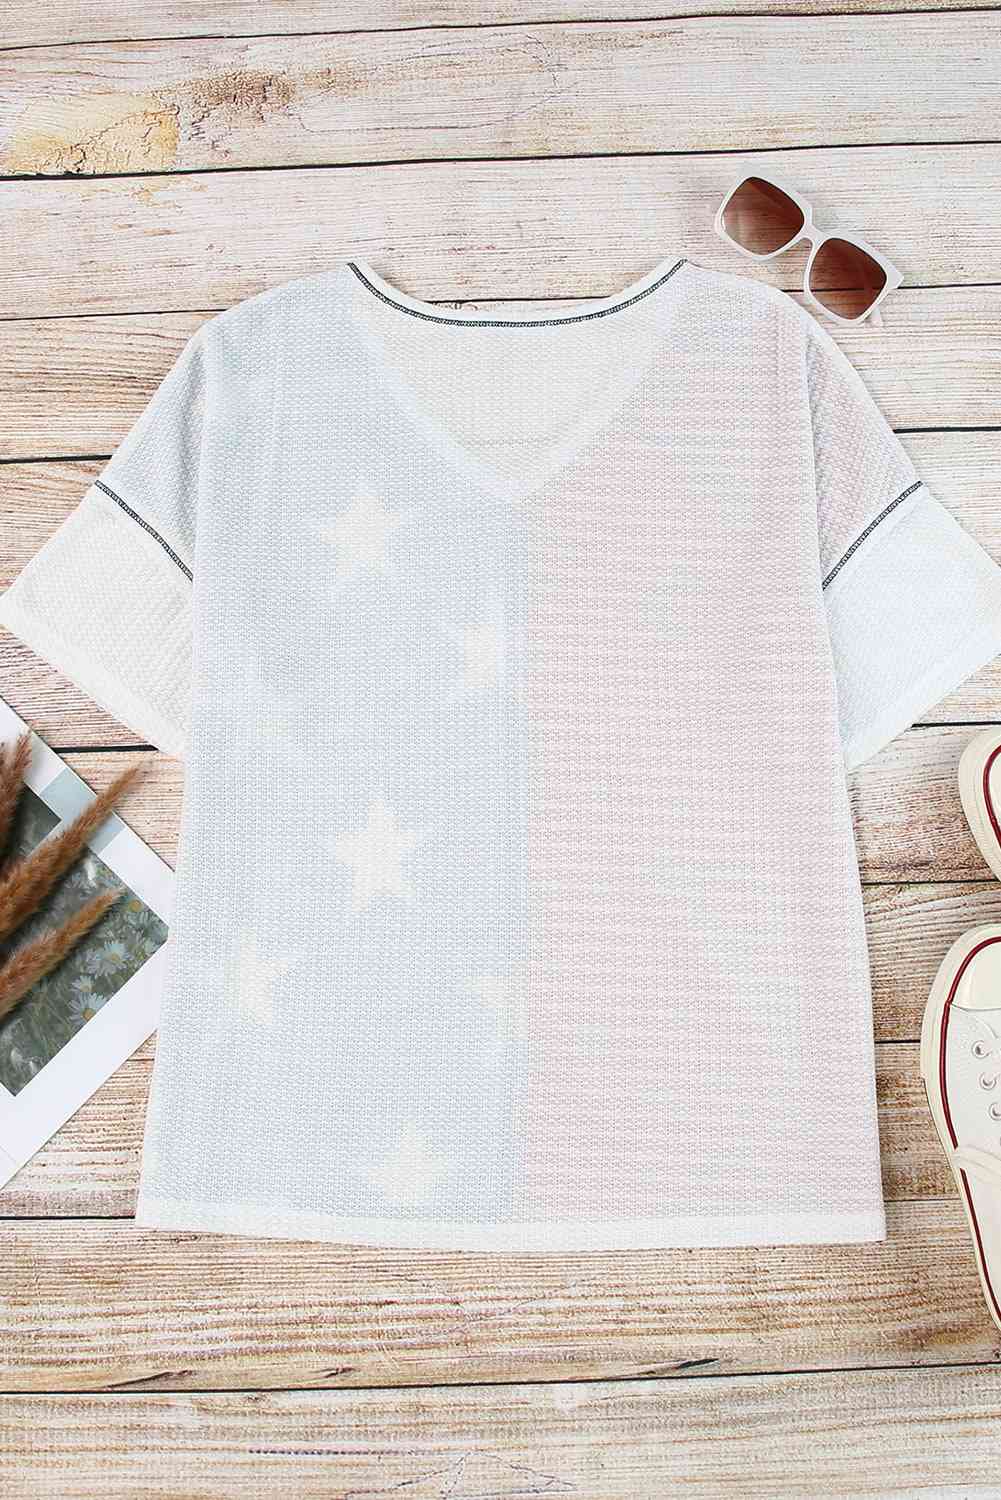 Star and Stripe V-Neck Top Print on any thing USA/STOD clothes